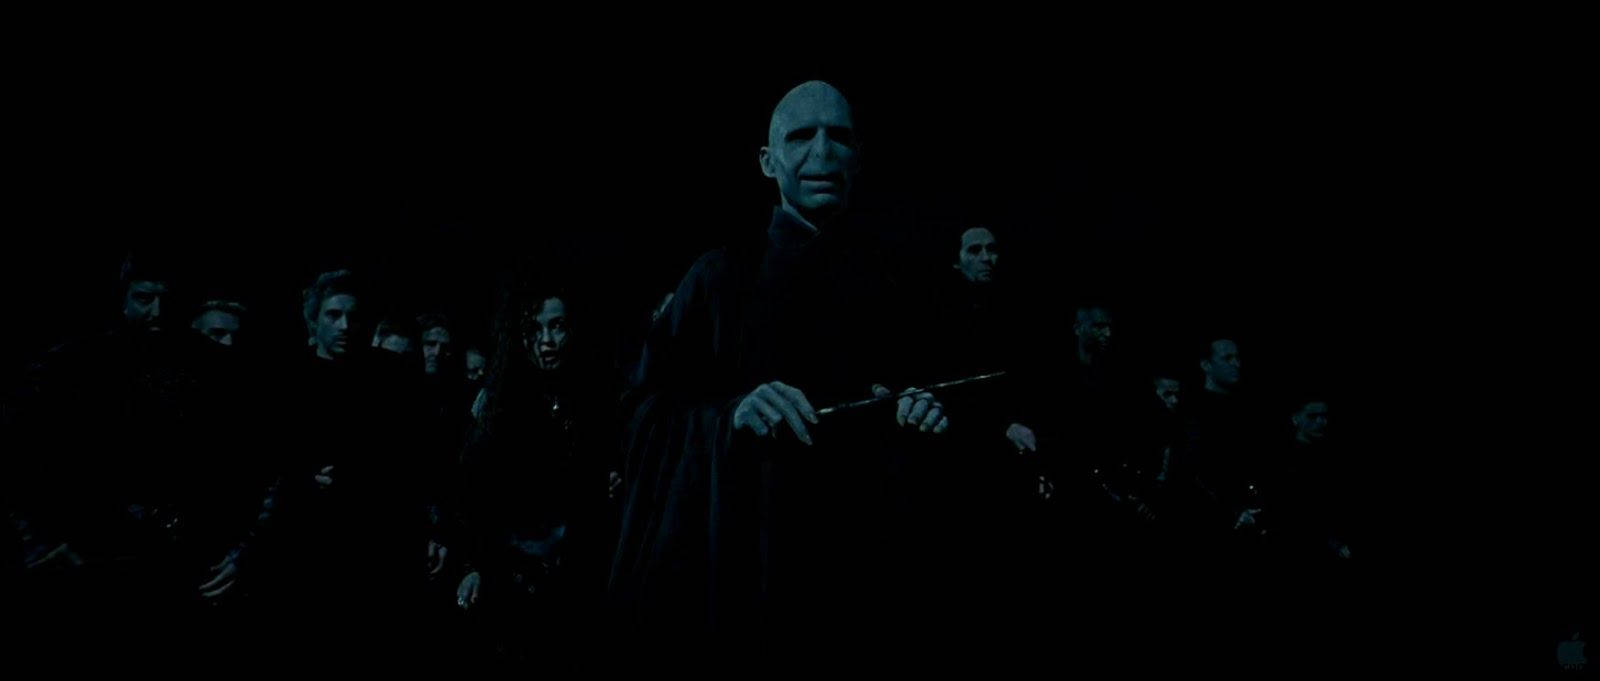 Lord Voldemort Evil Wizards